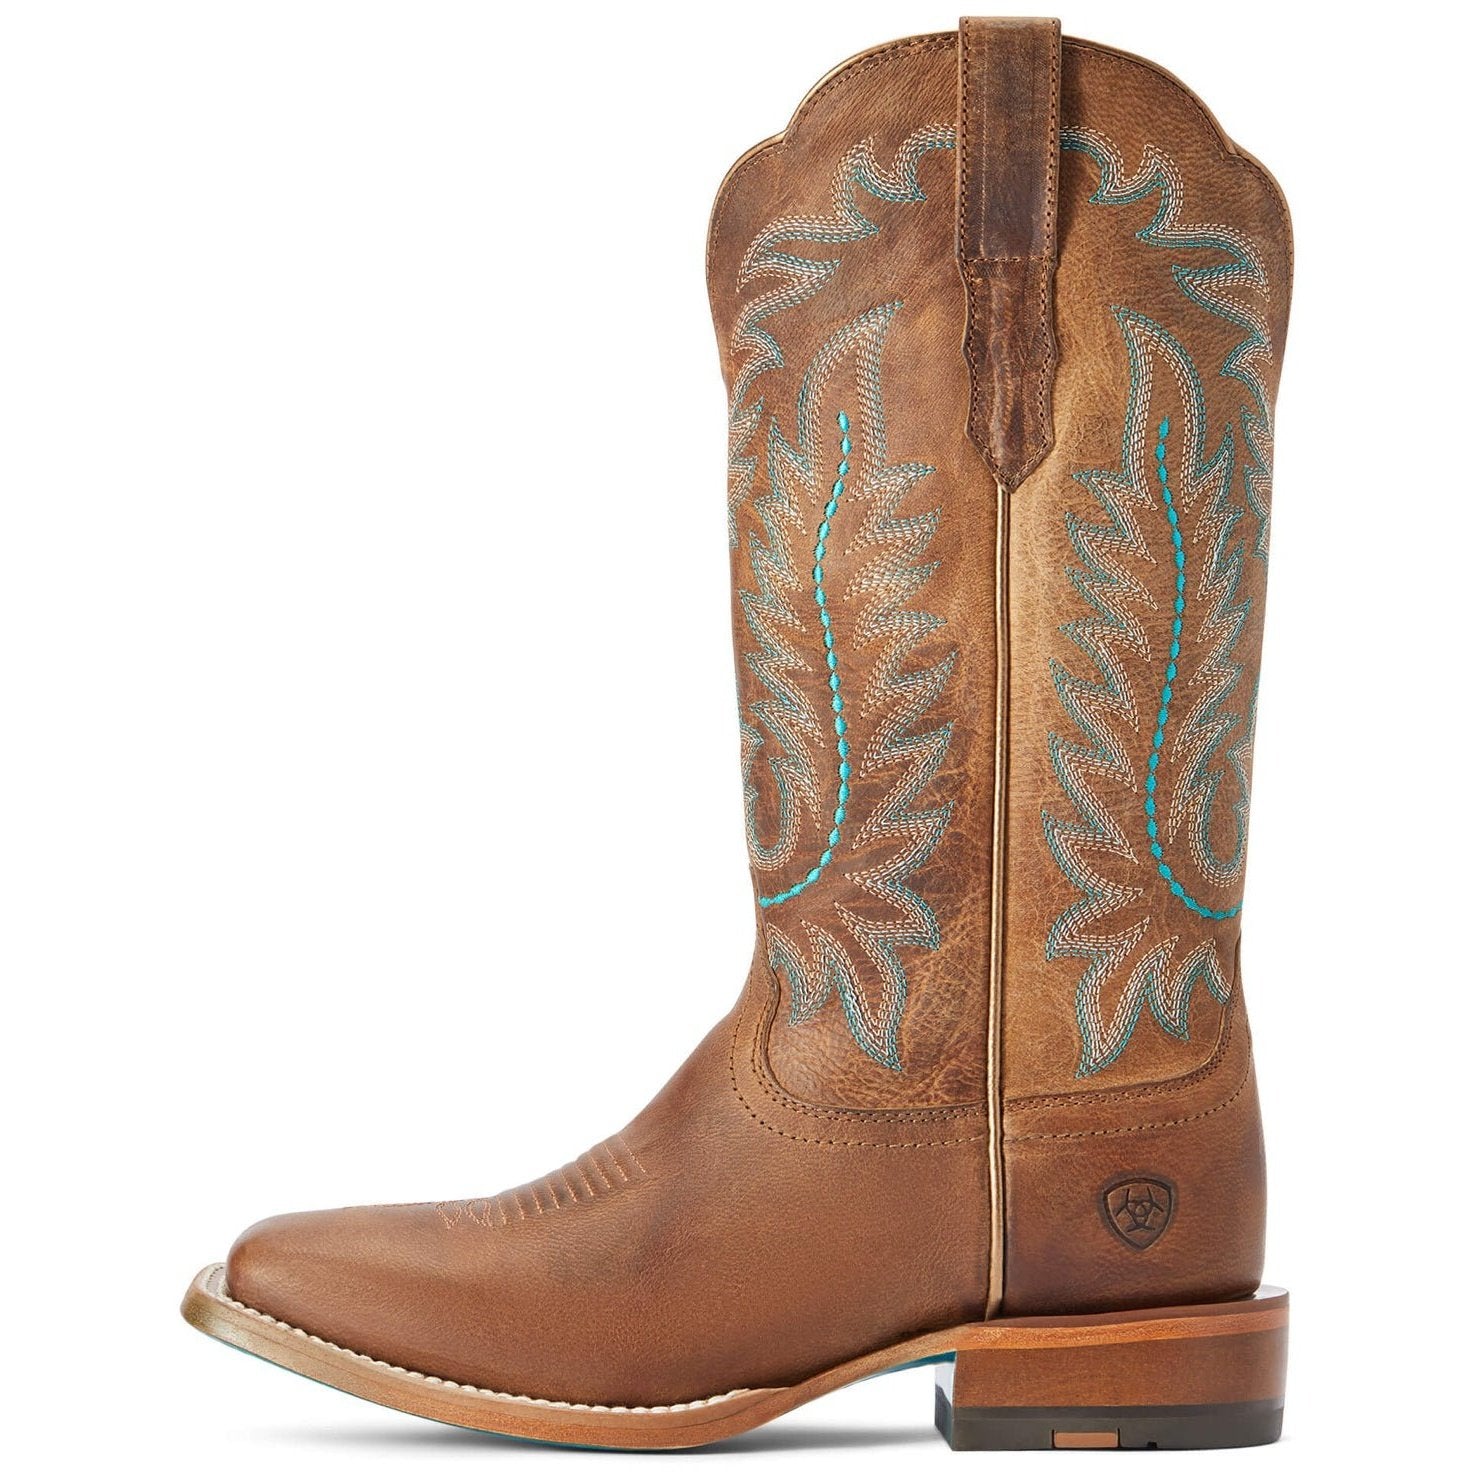 Ariat Women’s Cowgirl Boots 13.5" Frontier Tilly 10042423 - Ariat